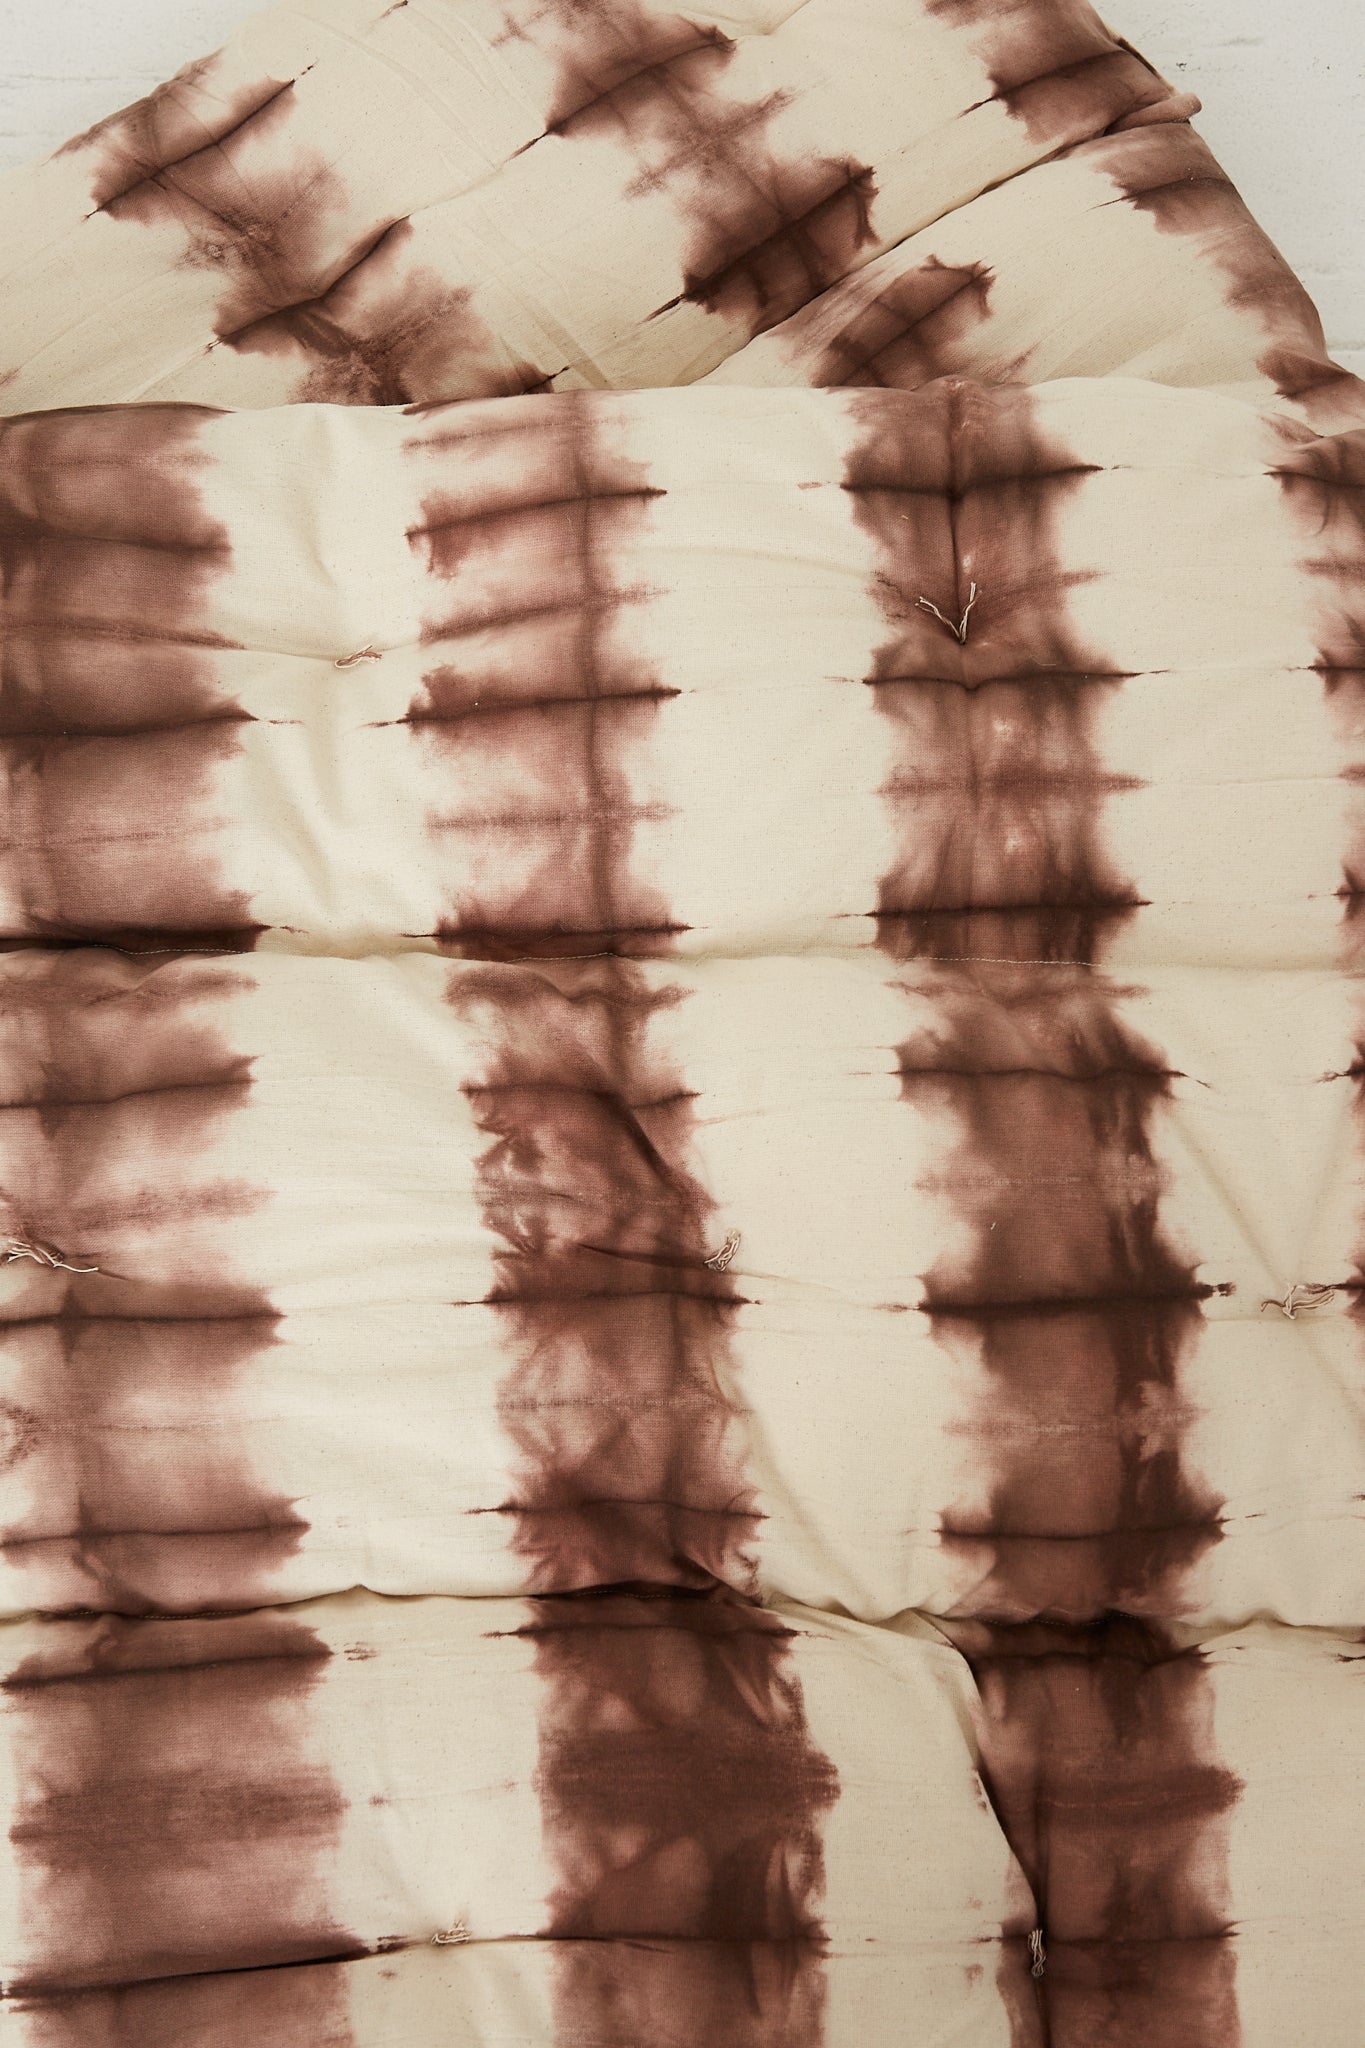 A Tufted Overlay Mattress in Chocolate Tie Dye adorned with a brown and white hand-dyed cotton Tensira comforter.